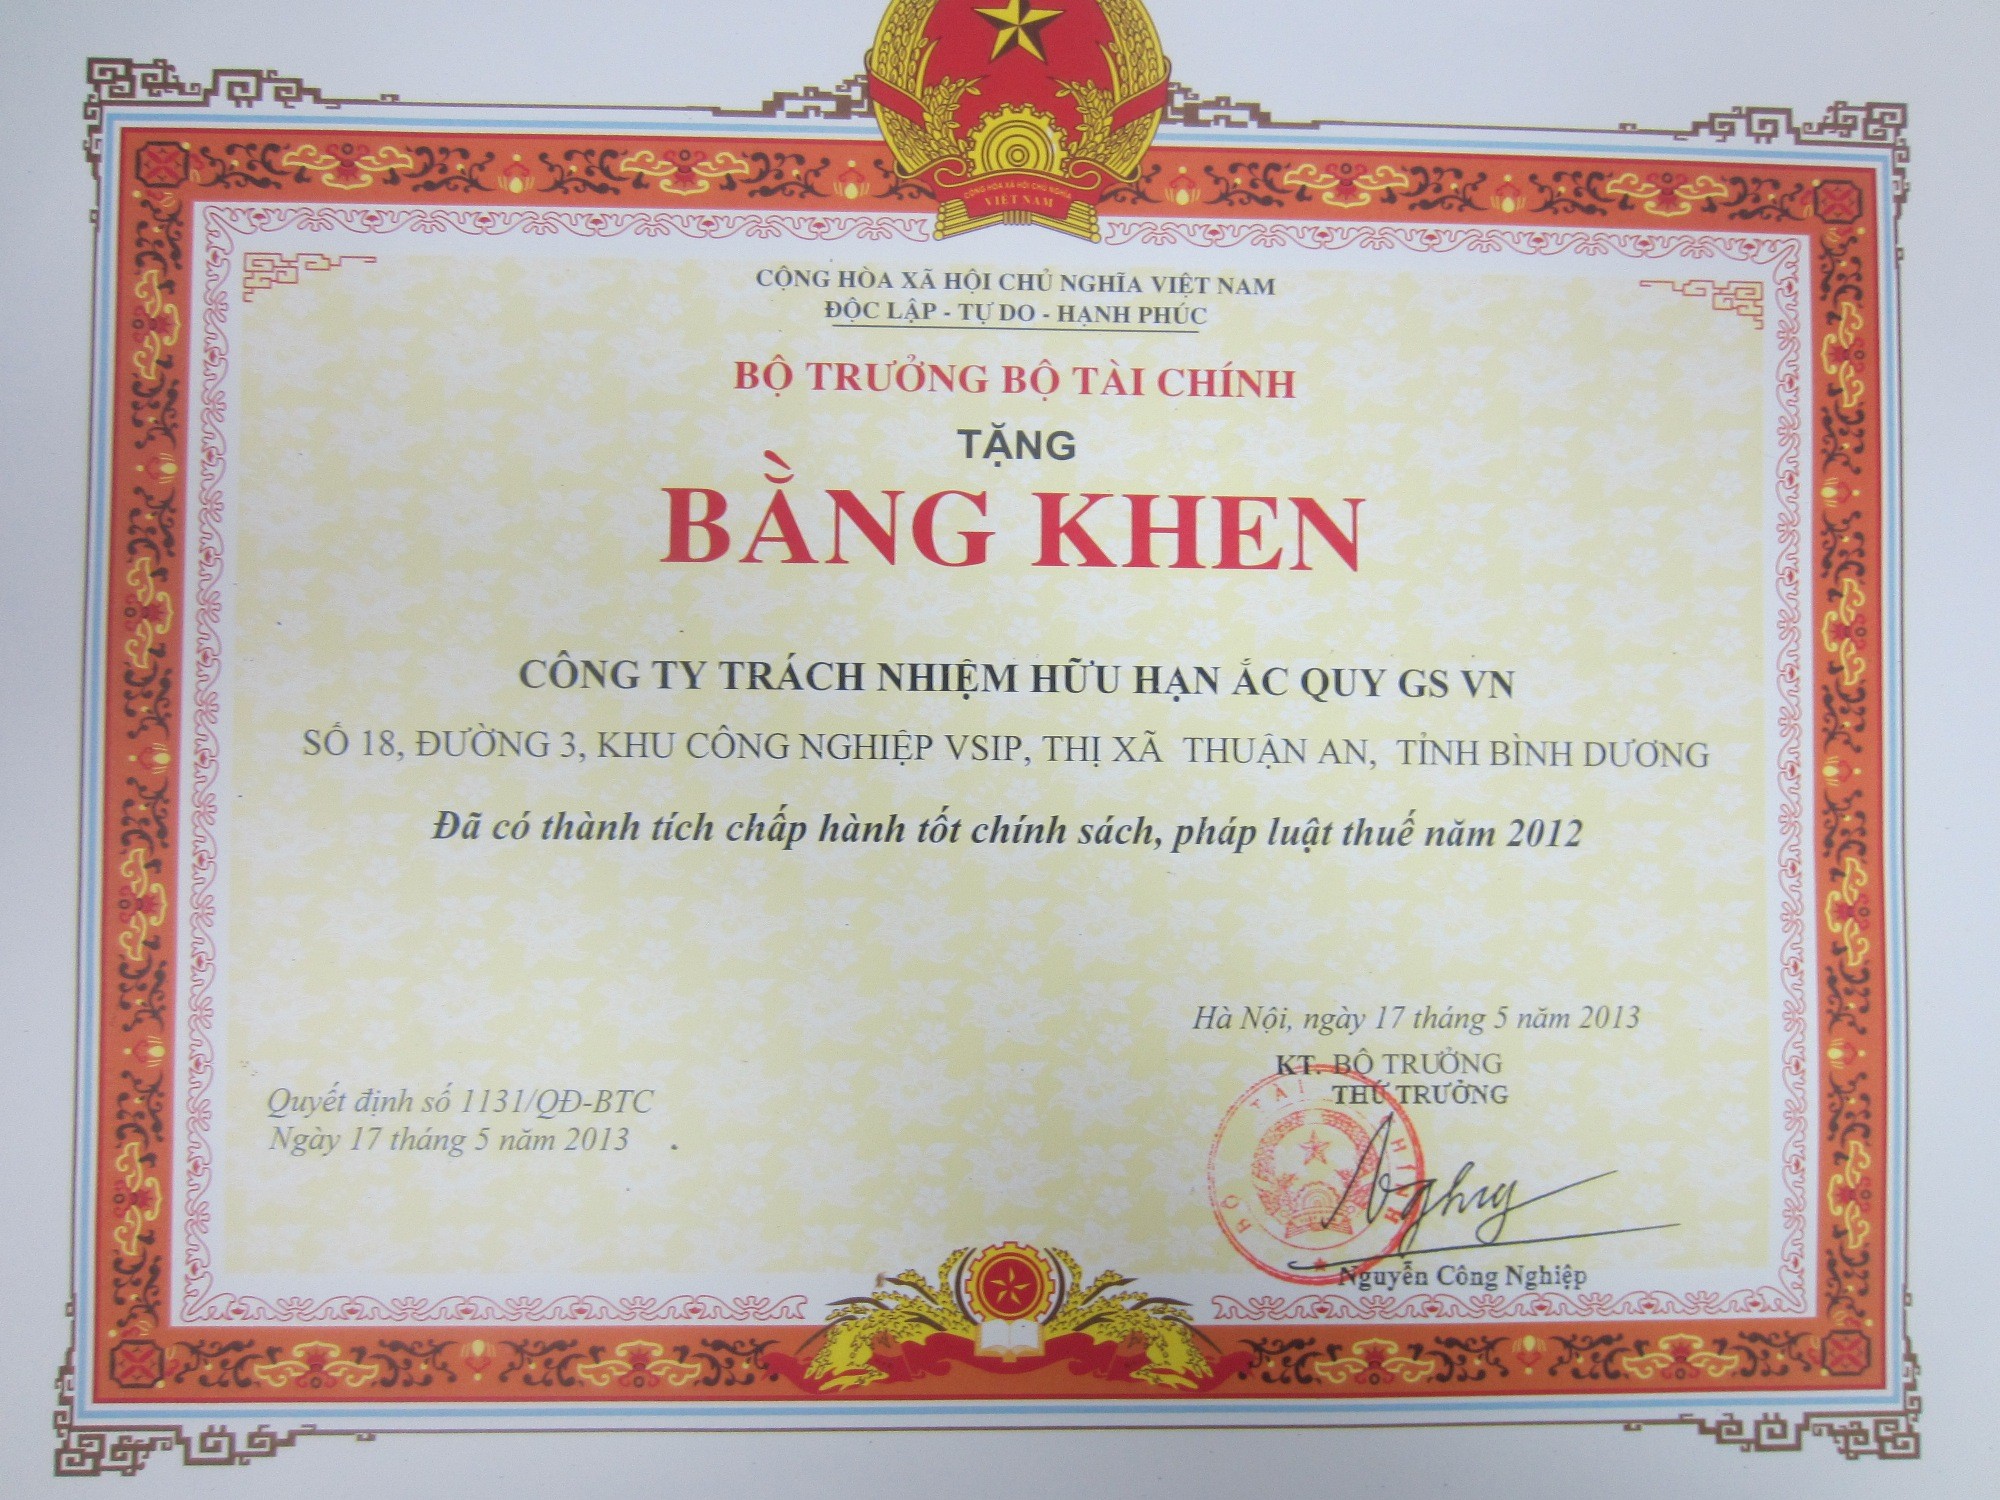 GS Battery Vietnam Co.,Ltd got the certificate of merit from the Minister of Finance about the achievements of doing the tax policy well, 2013.